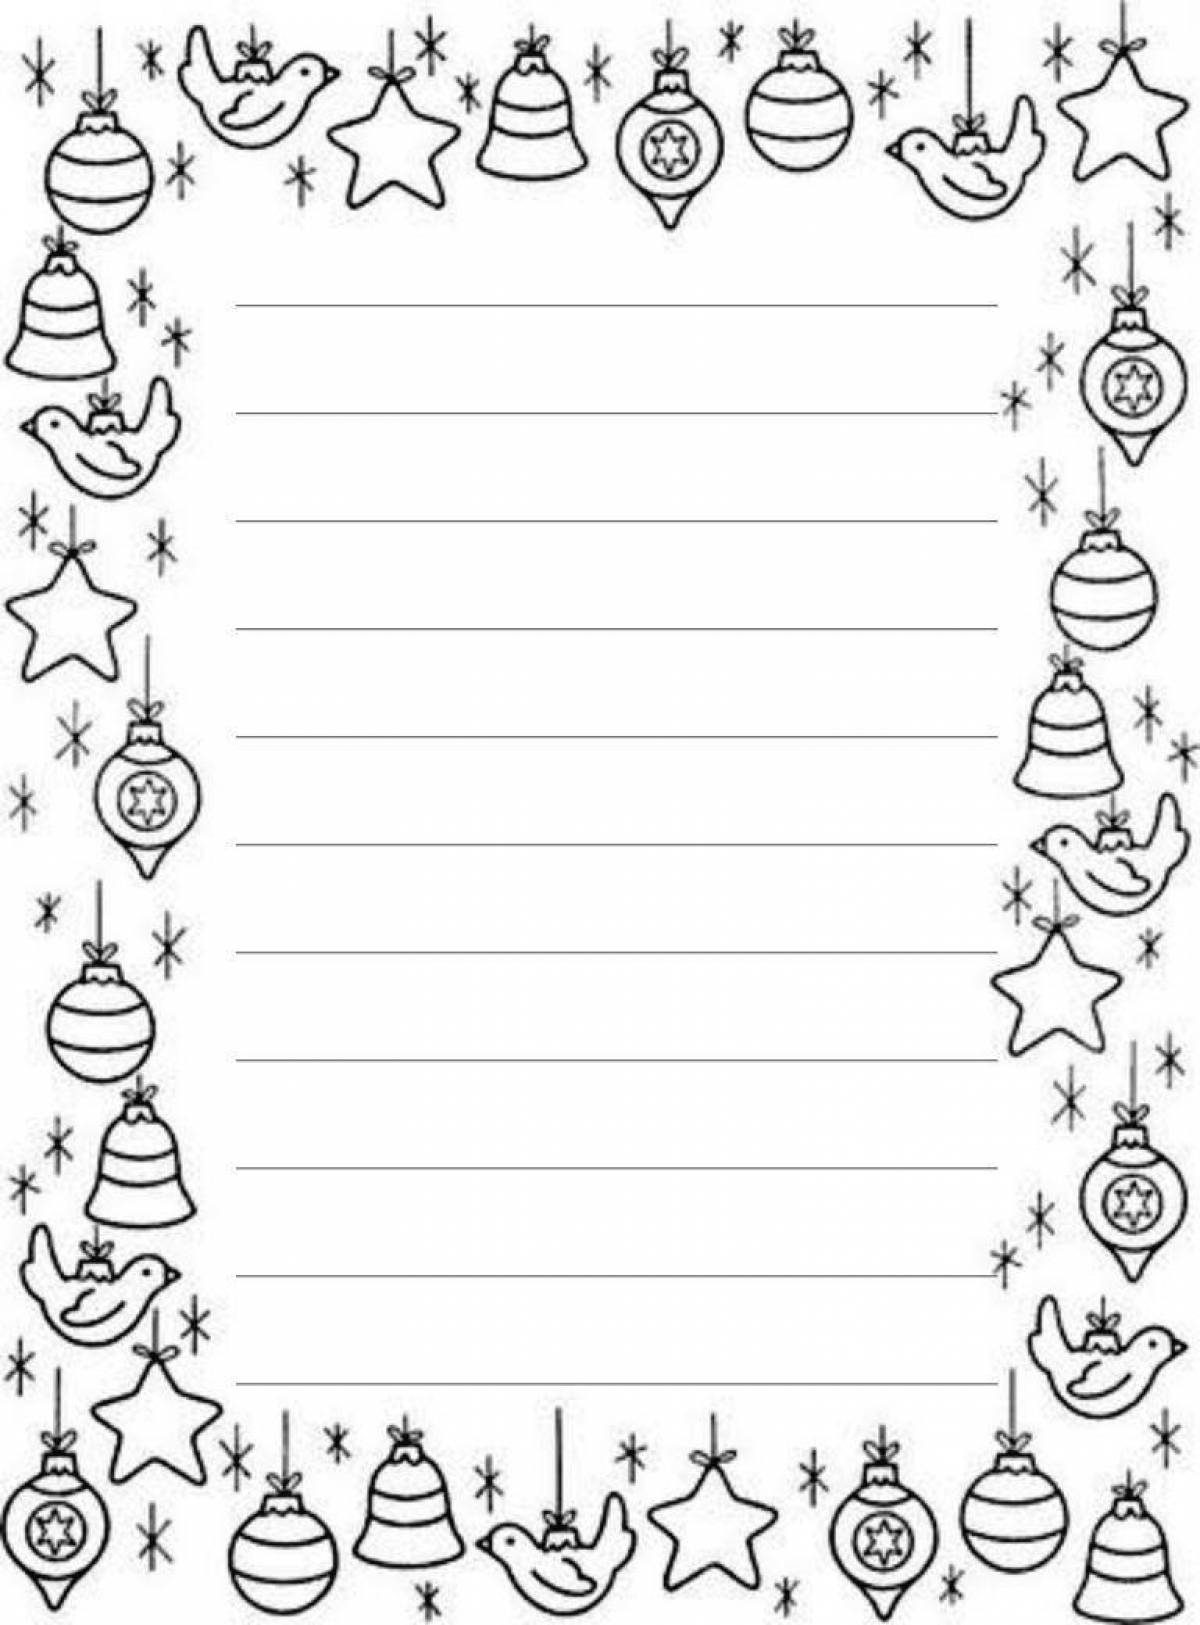 Cute coloring christmas frame